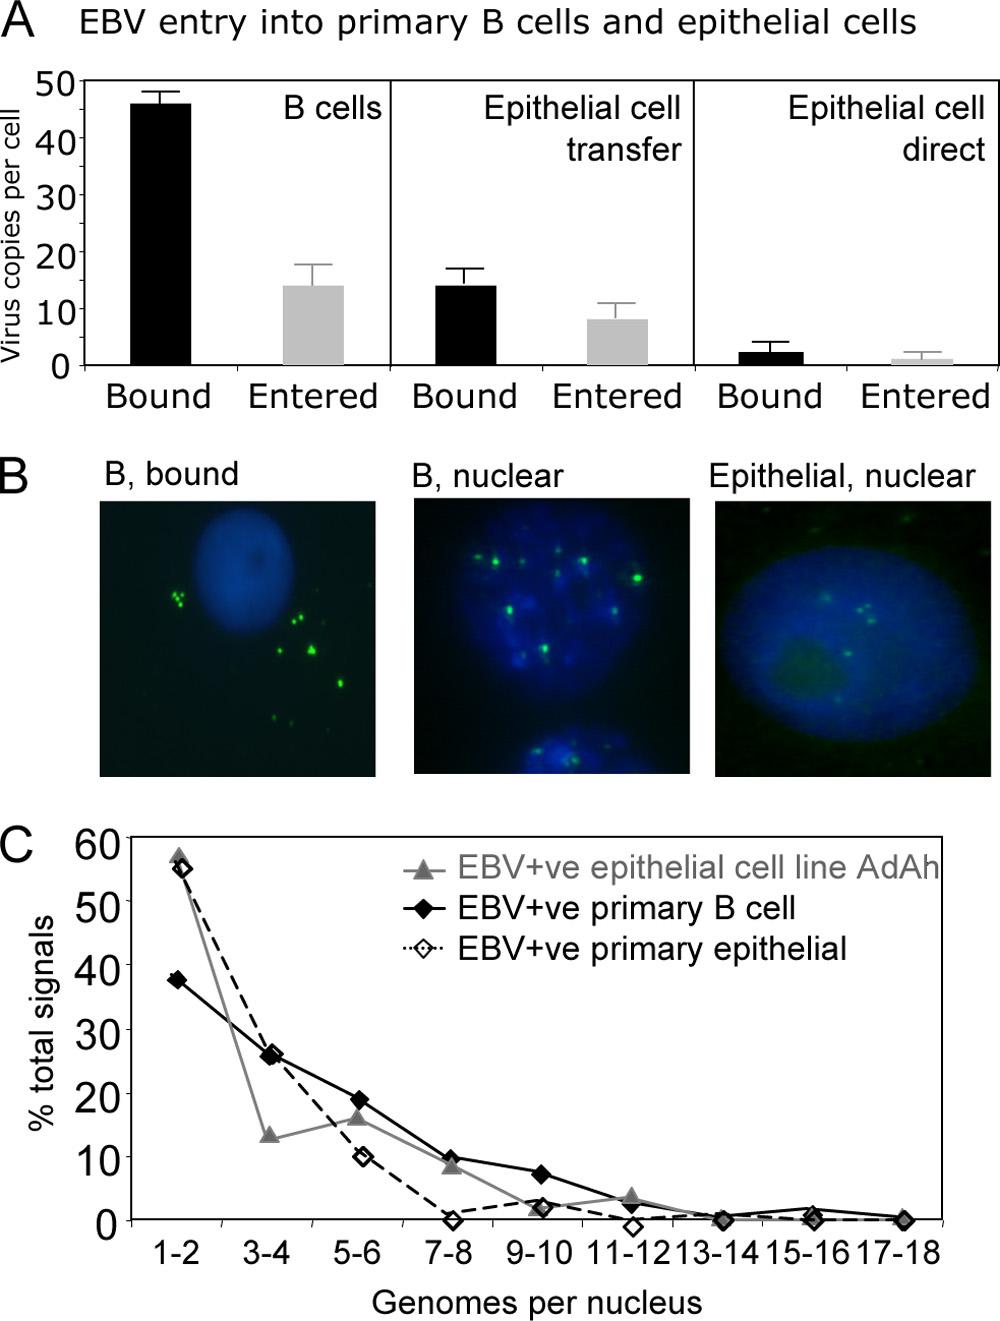 VOL. 83, 2009 EBV INFECTION OF EPITHELIAL CELLS 7751 FIG. 1. EBV entry into B cells and primary epithelial cells.